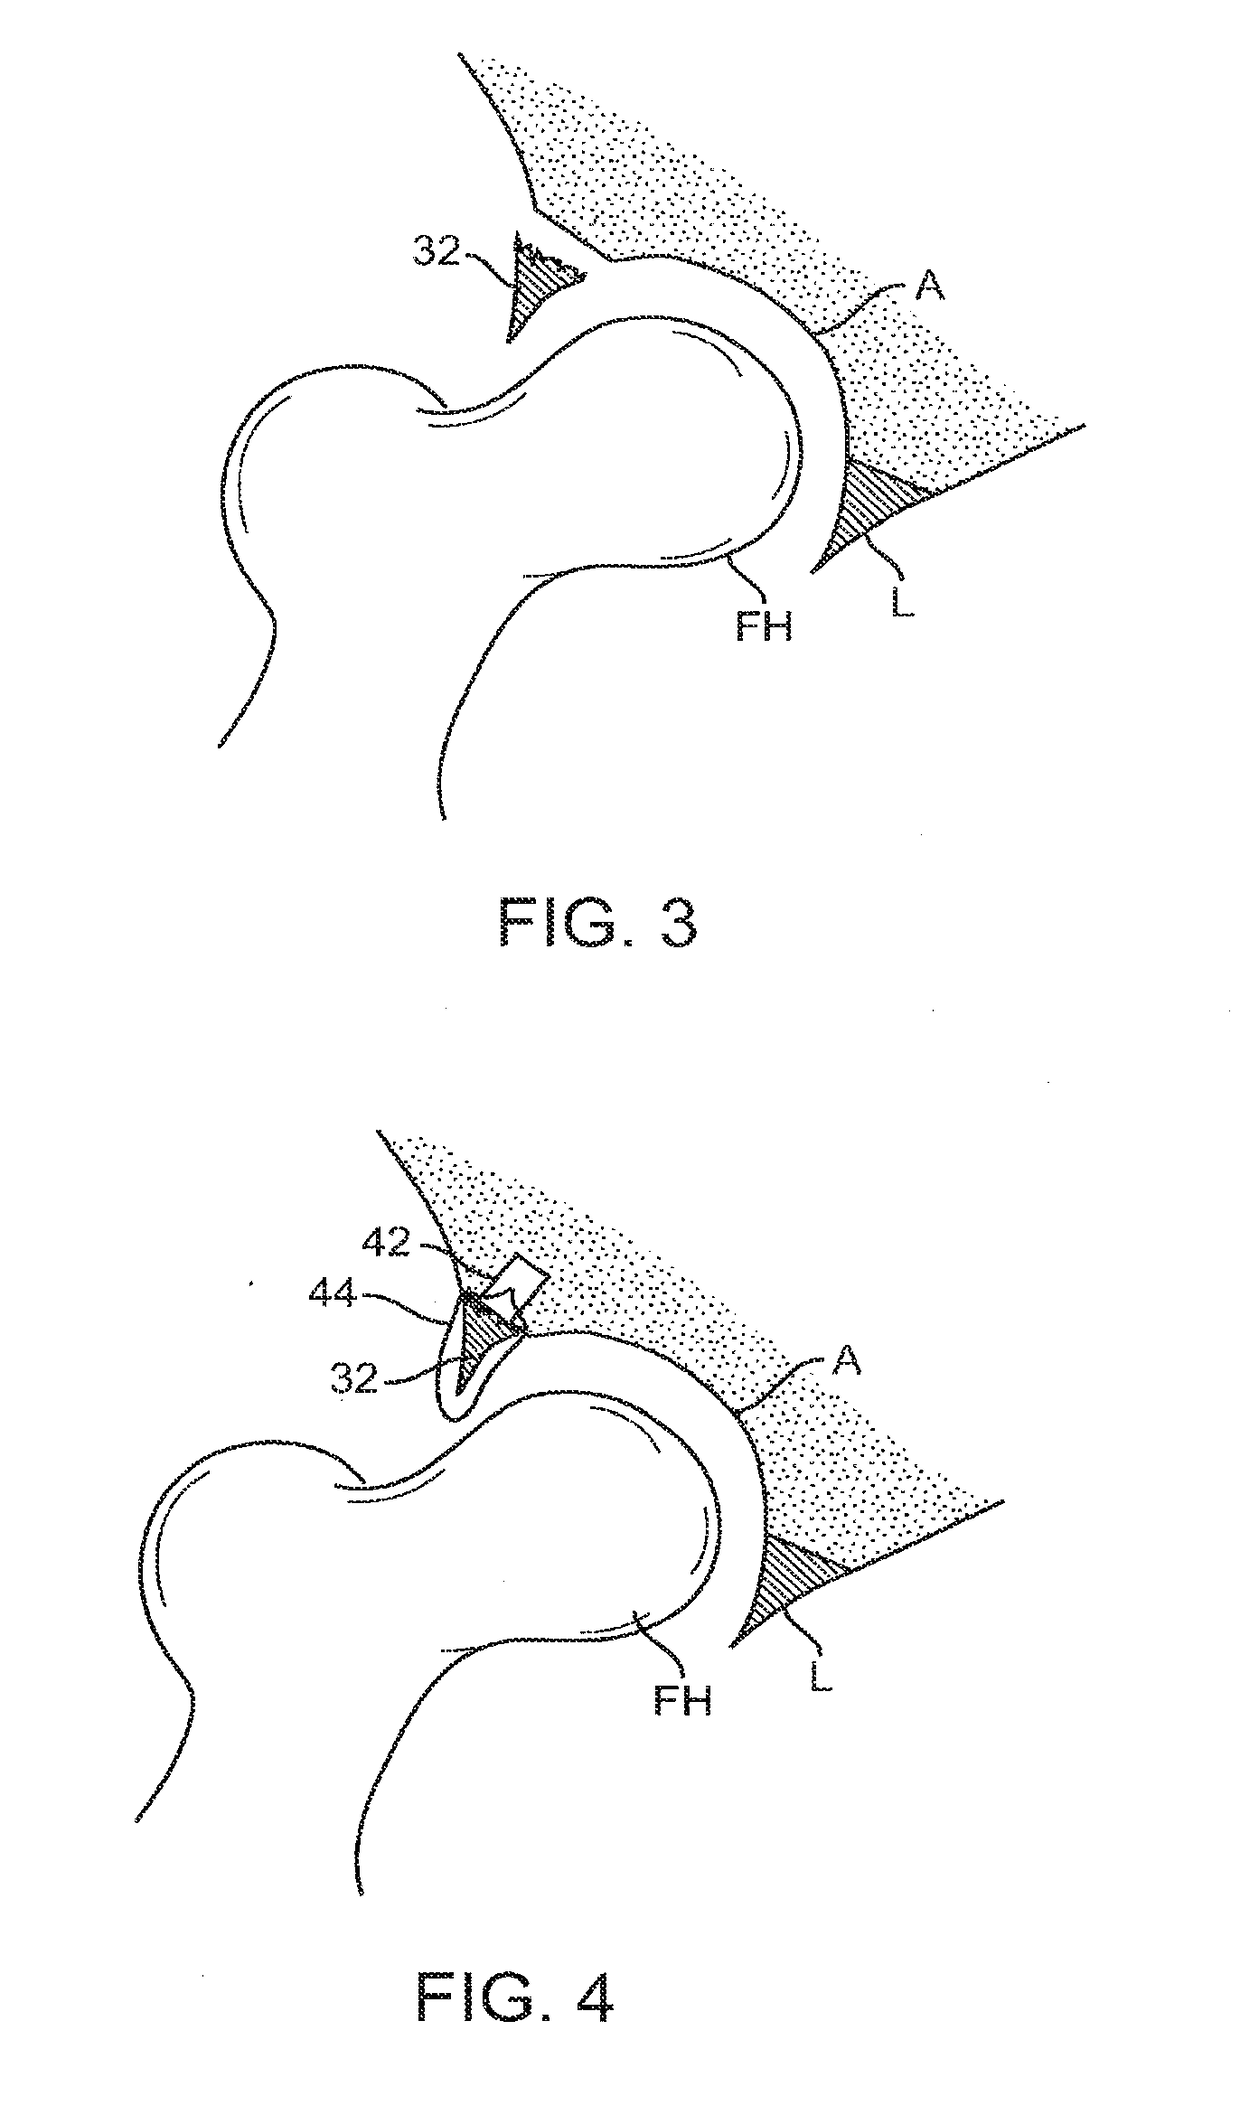 Knotless suture anchor and methods of use